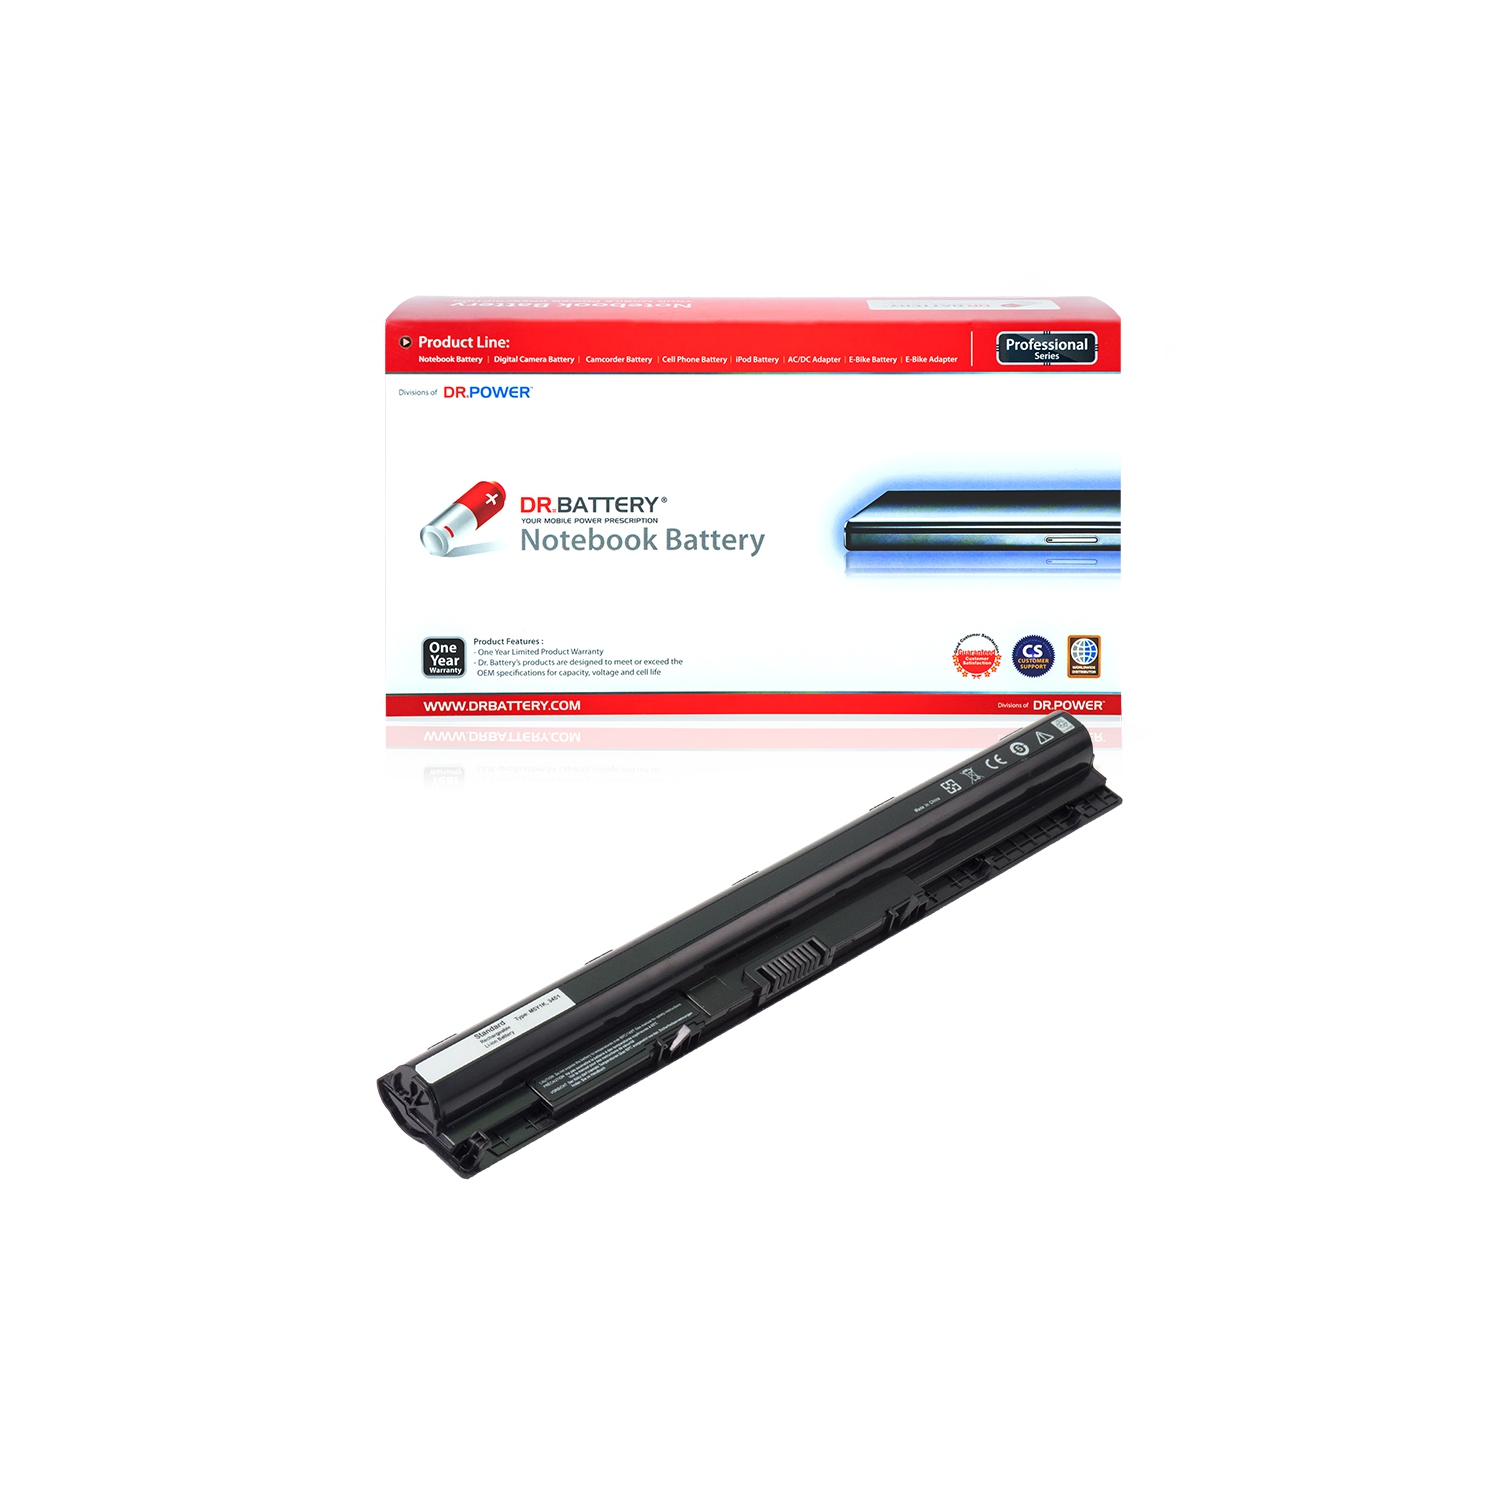 DR. BATTERY - Replacement for Dell Inspiron 15-5552 / 15-5555 / 15-5558 / 15-5566 / 15-5758 / P64G / P64G001 / P65G / VN3N0